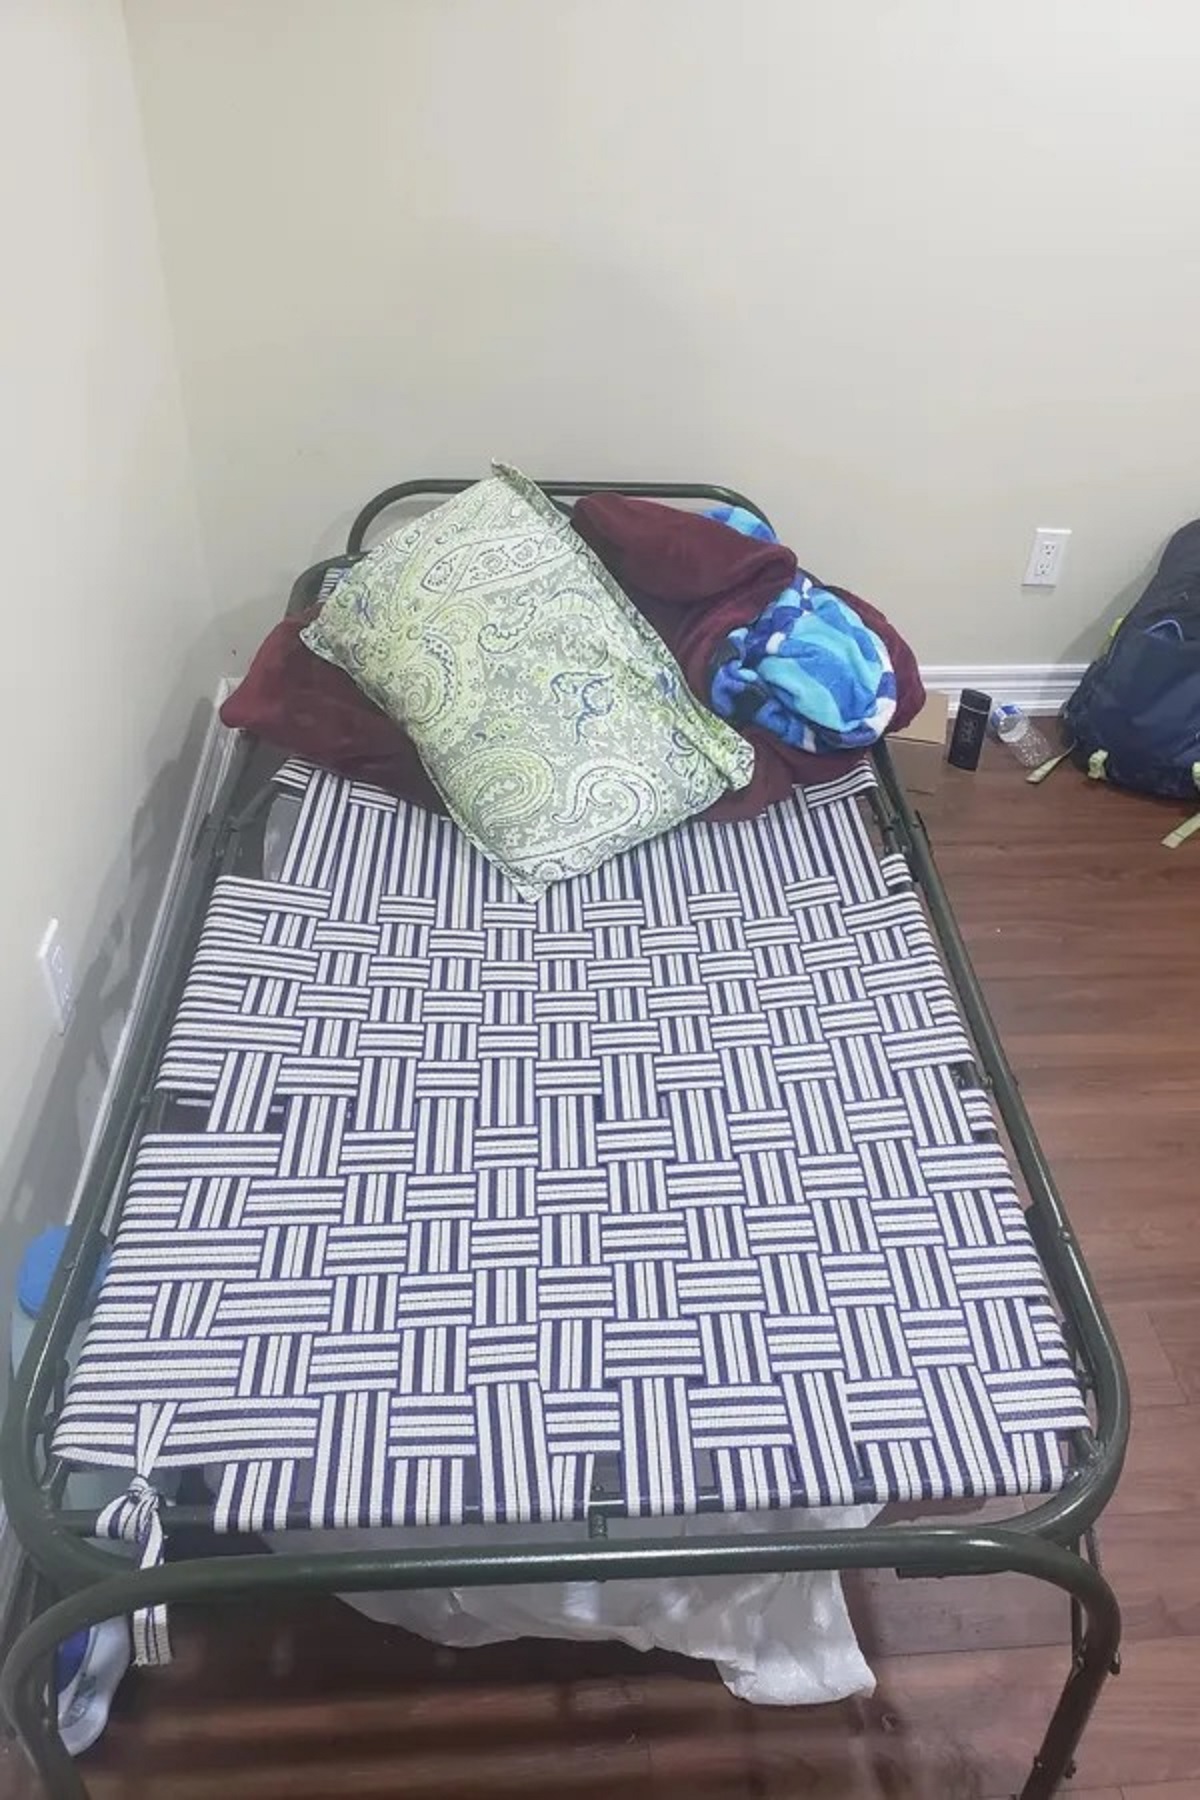 My landlord took away the bed and mattress that were provided in the “furnished” rental and replaced it with this thing which is really hard to sleep on.